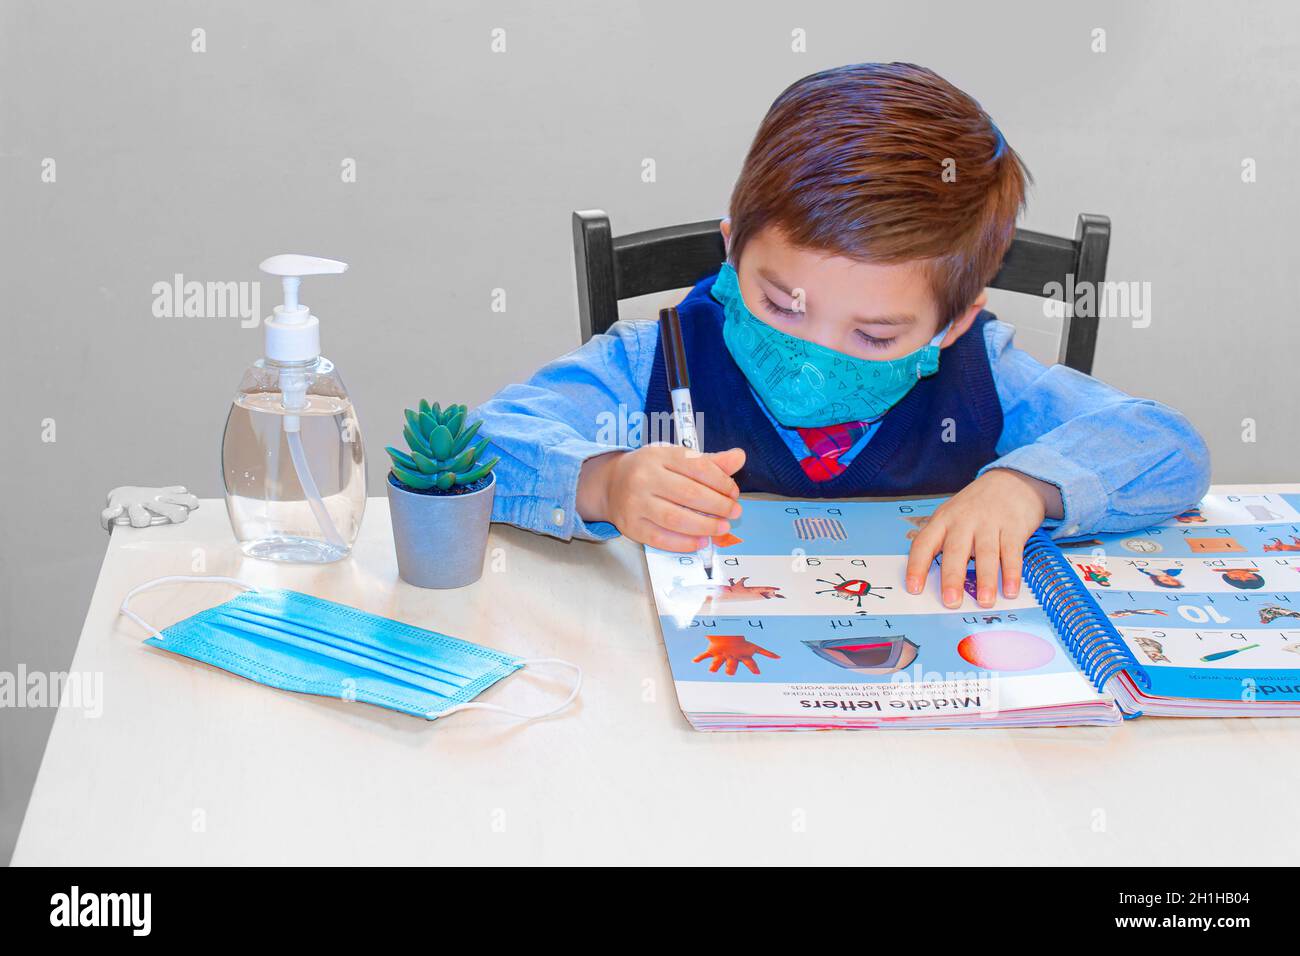 Calgary, Alberta, Canada. Sep 6, 2020. A kinder garden, pre-school student learning with an activity work book with a face mask and hand sanitizer on Stock Photo